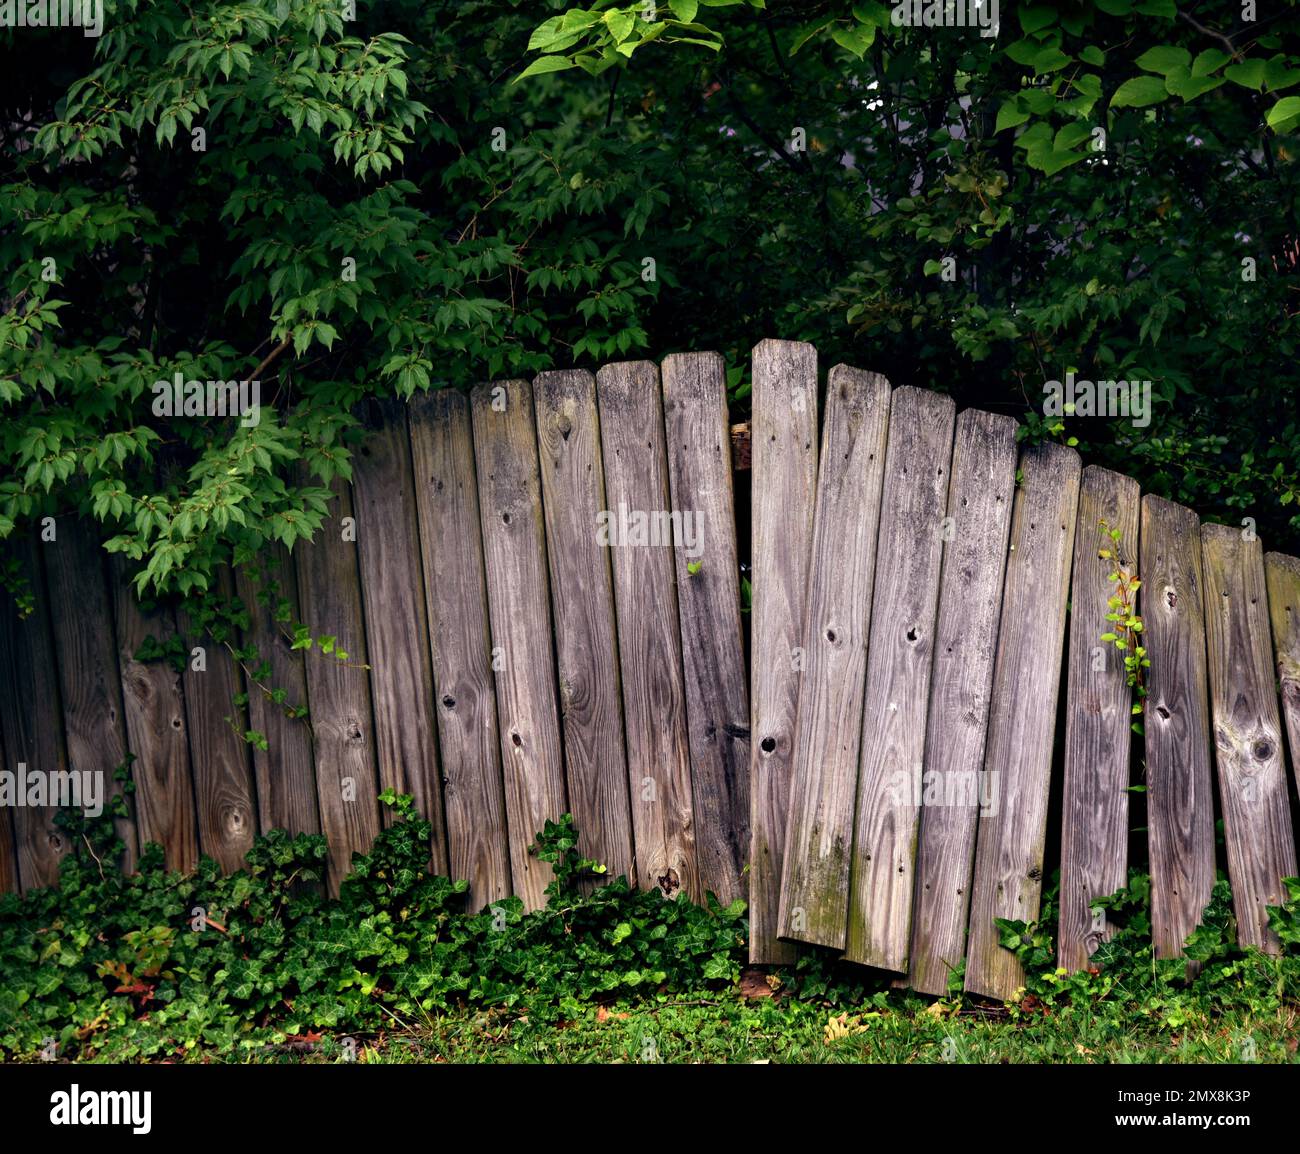 Rustic, broken, wooden fence collapses from age and deterioration.  Limbs and ivy begin to spread between boards. Stock Photo